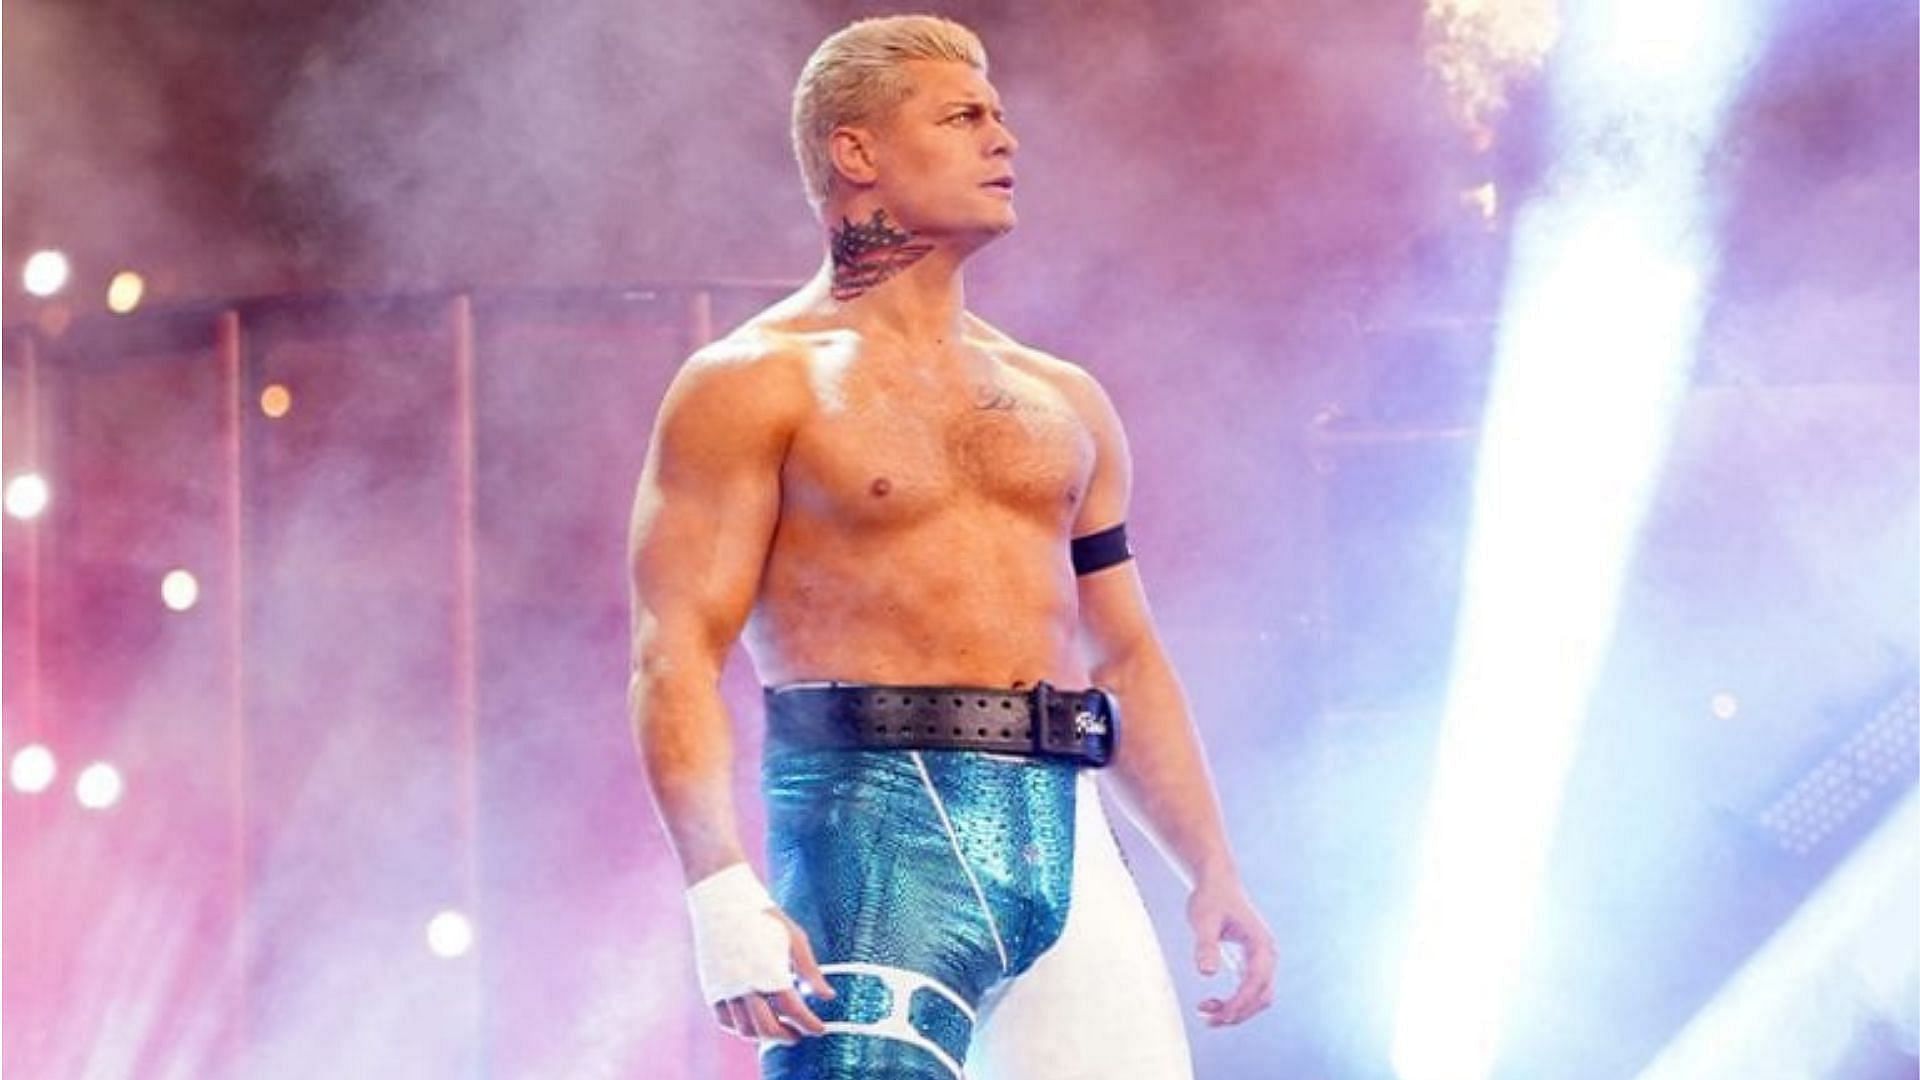 Cody Rhodes is now a free agent after his AEW contract expired